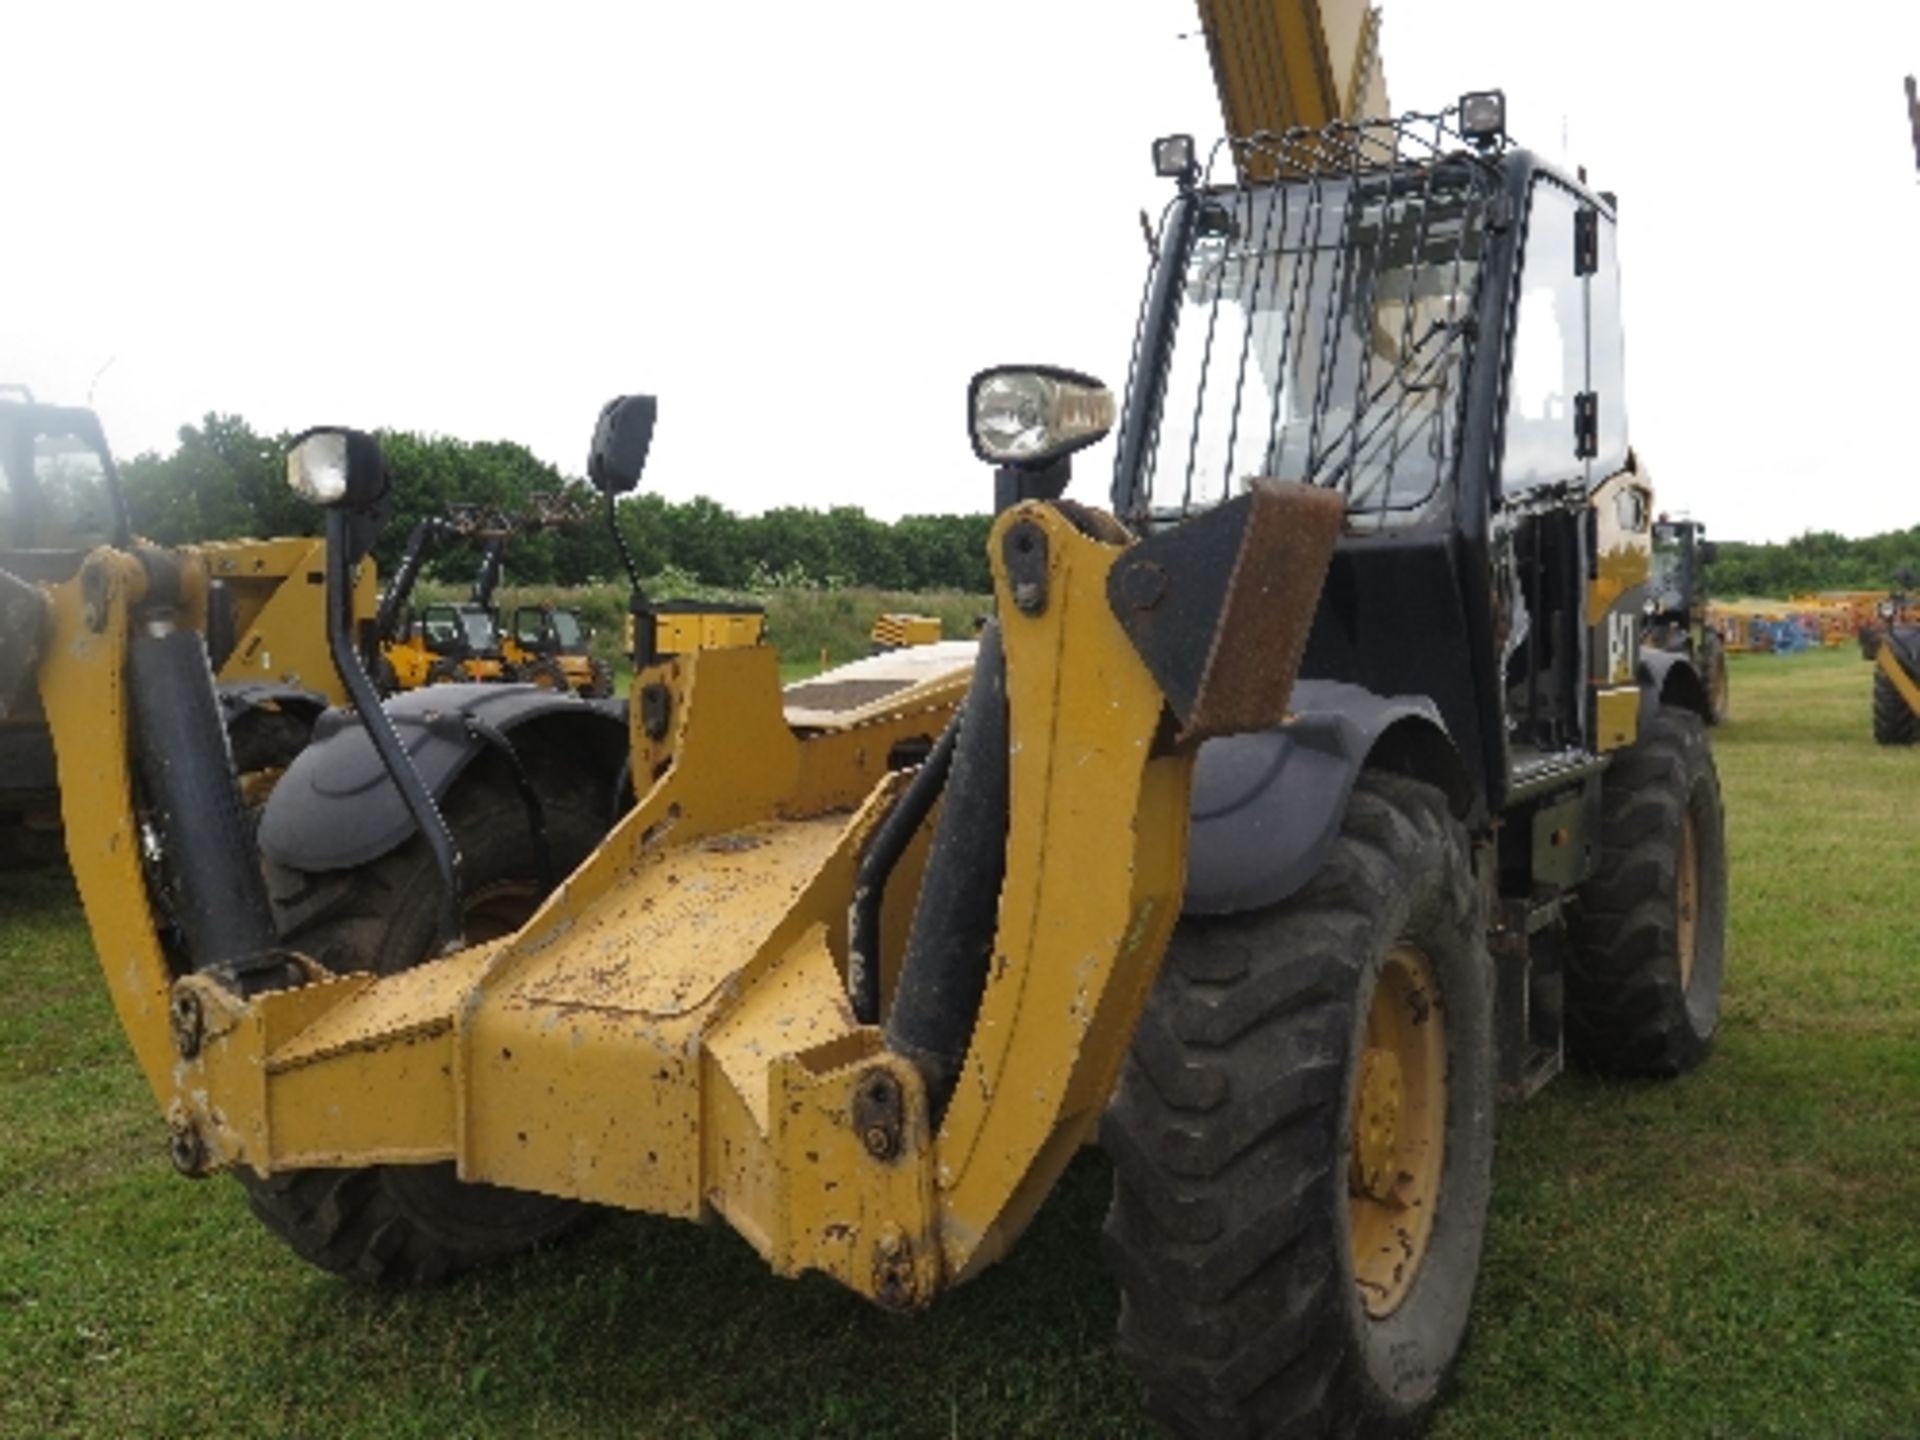 Caterpillar TH580B telehandler 4608 hrs  143934
BELIEVED 2006
NO TELE IN/OUT FUNCTION
ALL LOTS - Image 3 of 7